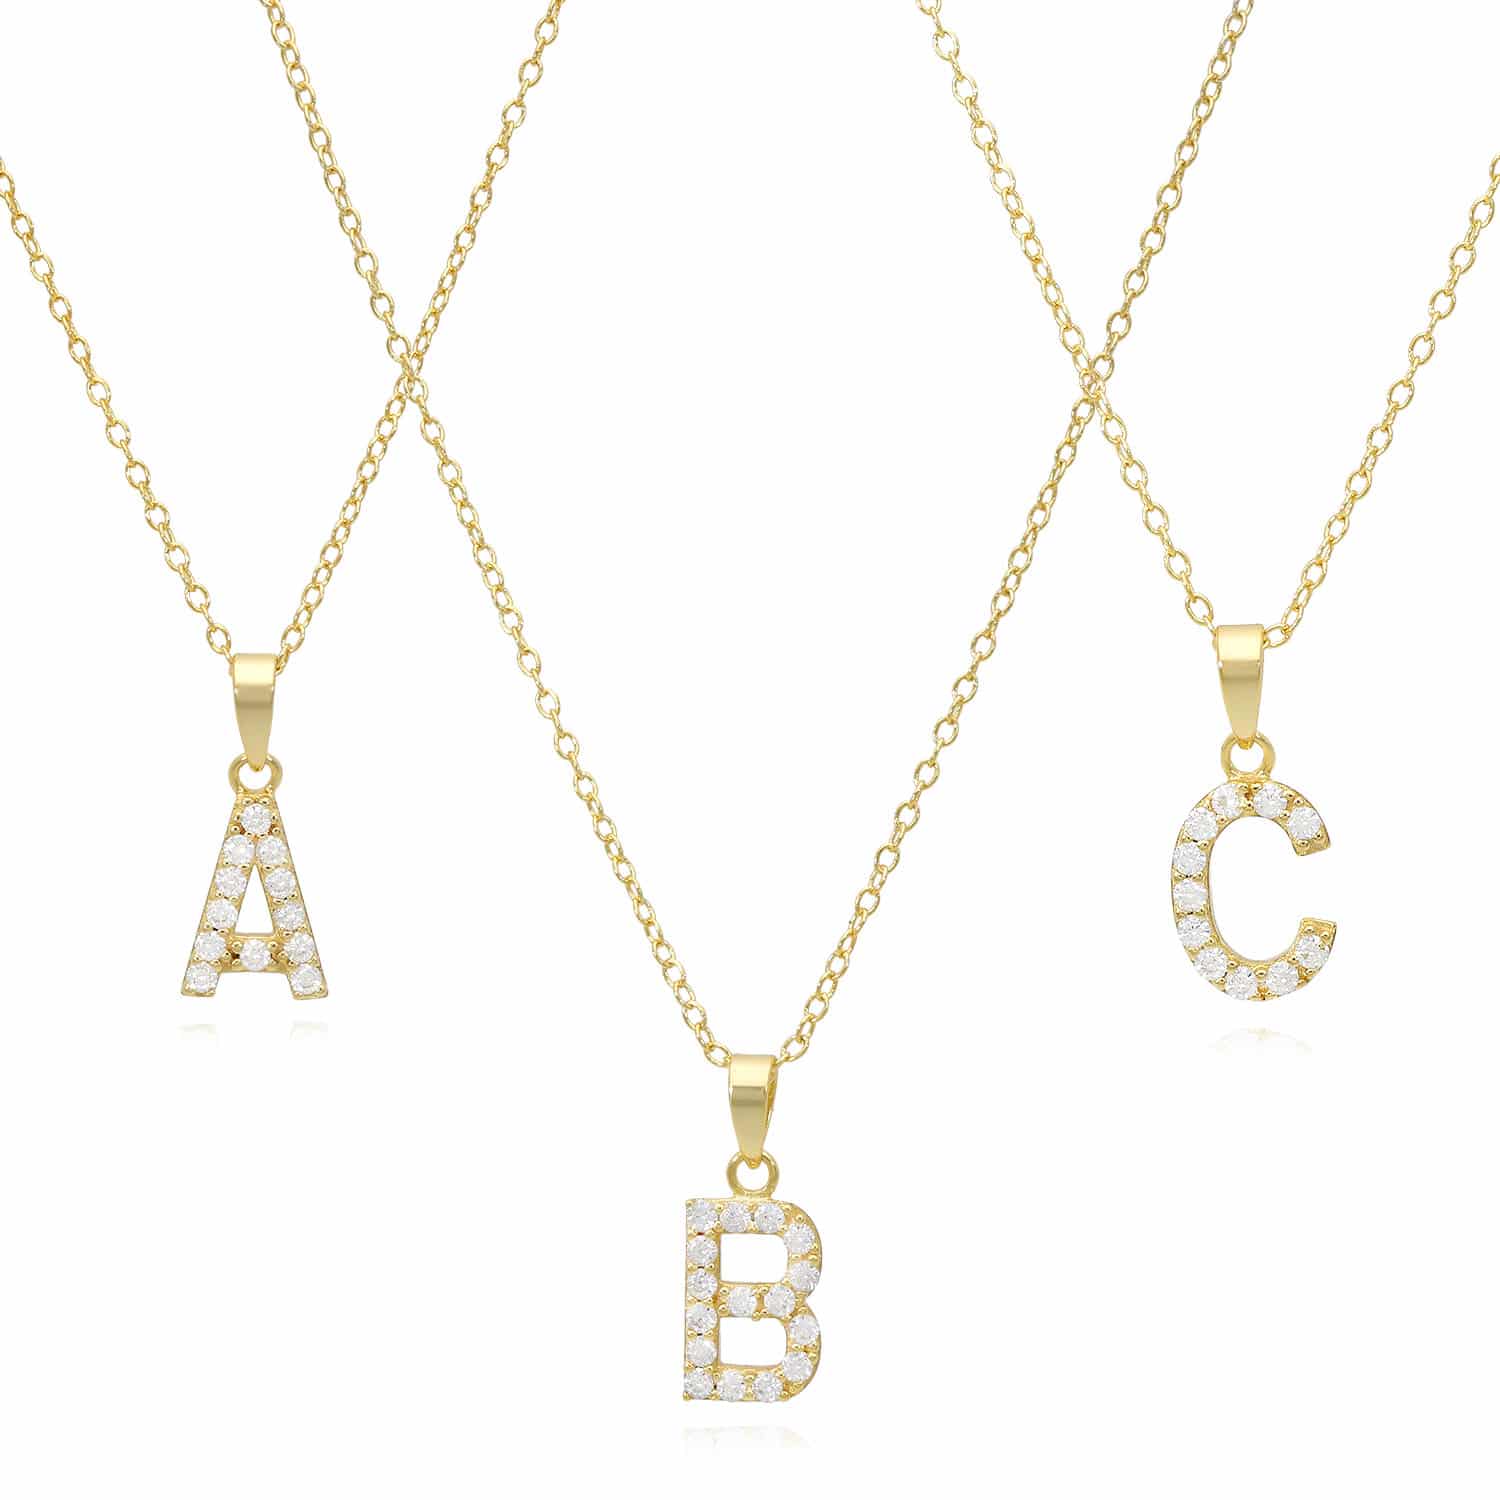 18K Yellow Gold Over Silver Cable Necklace 18" Initial Letter Pendant 0.7" - D